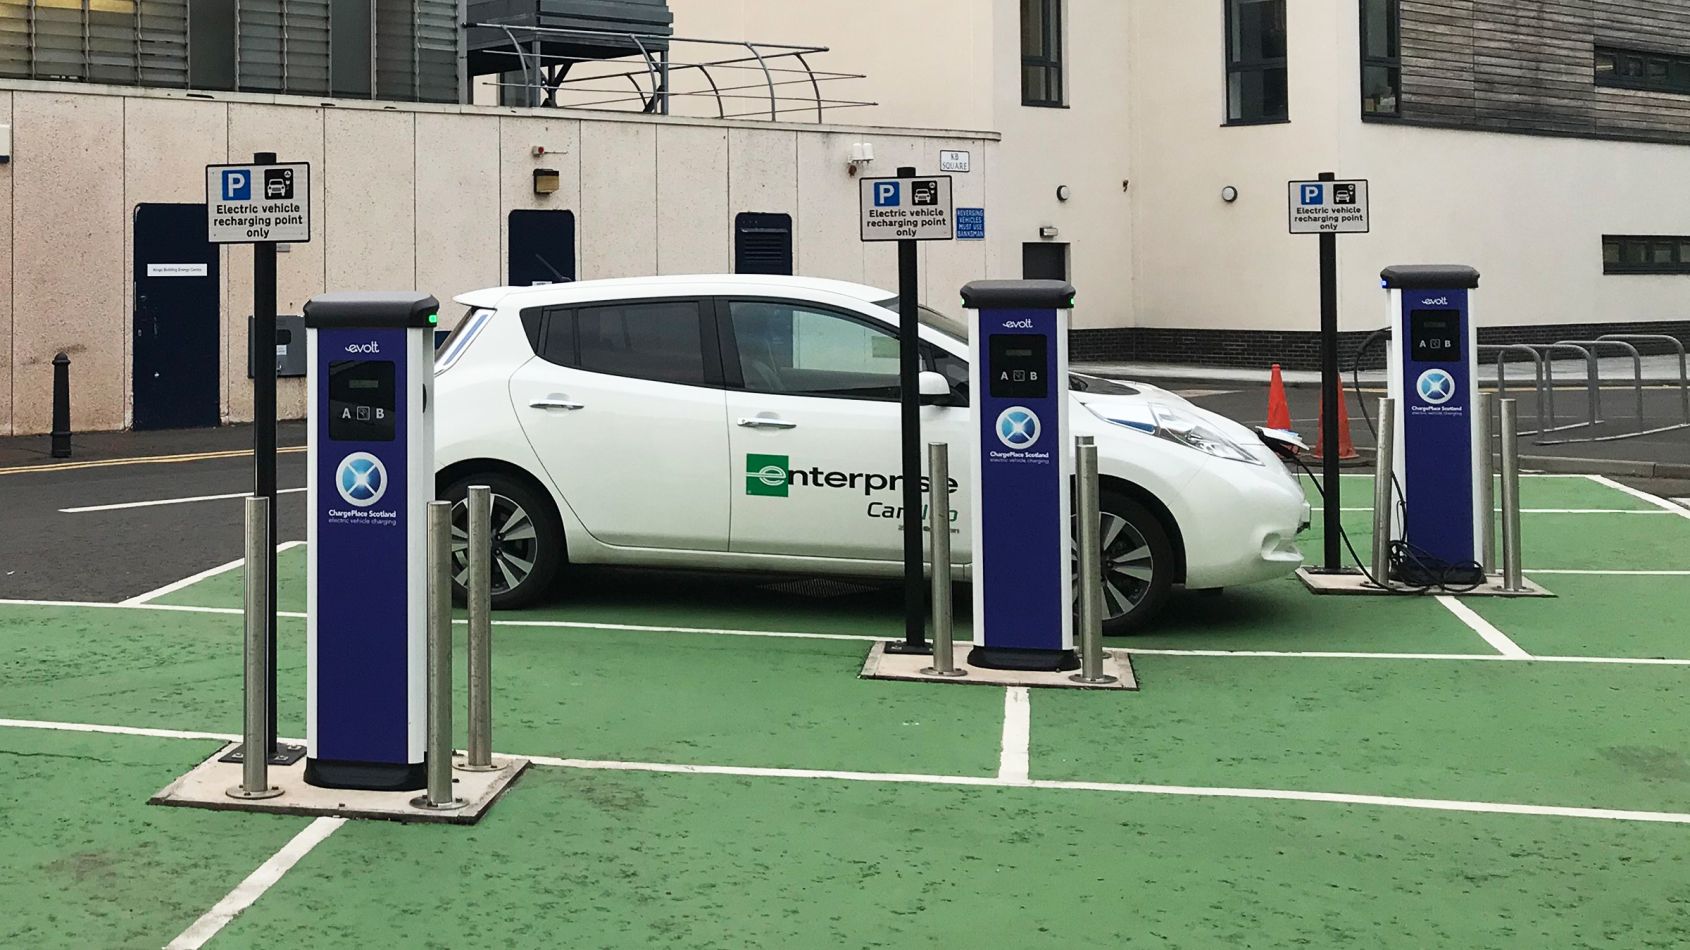 Complete guide to the ChargePlace Scotland charging network